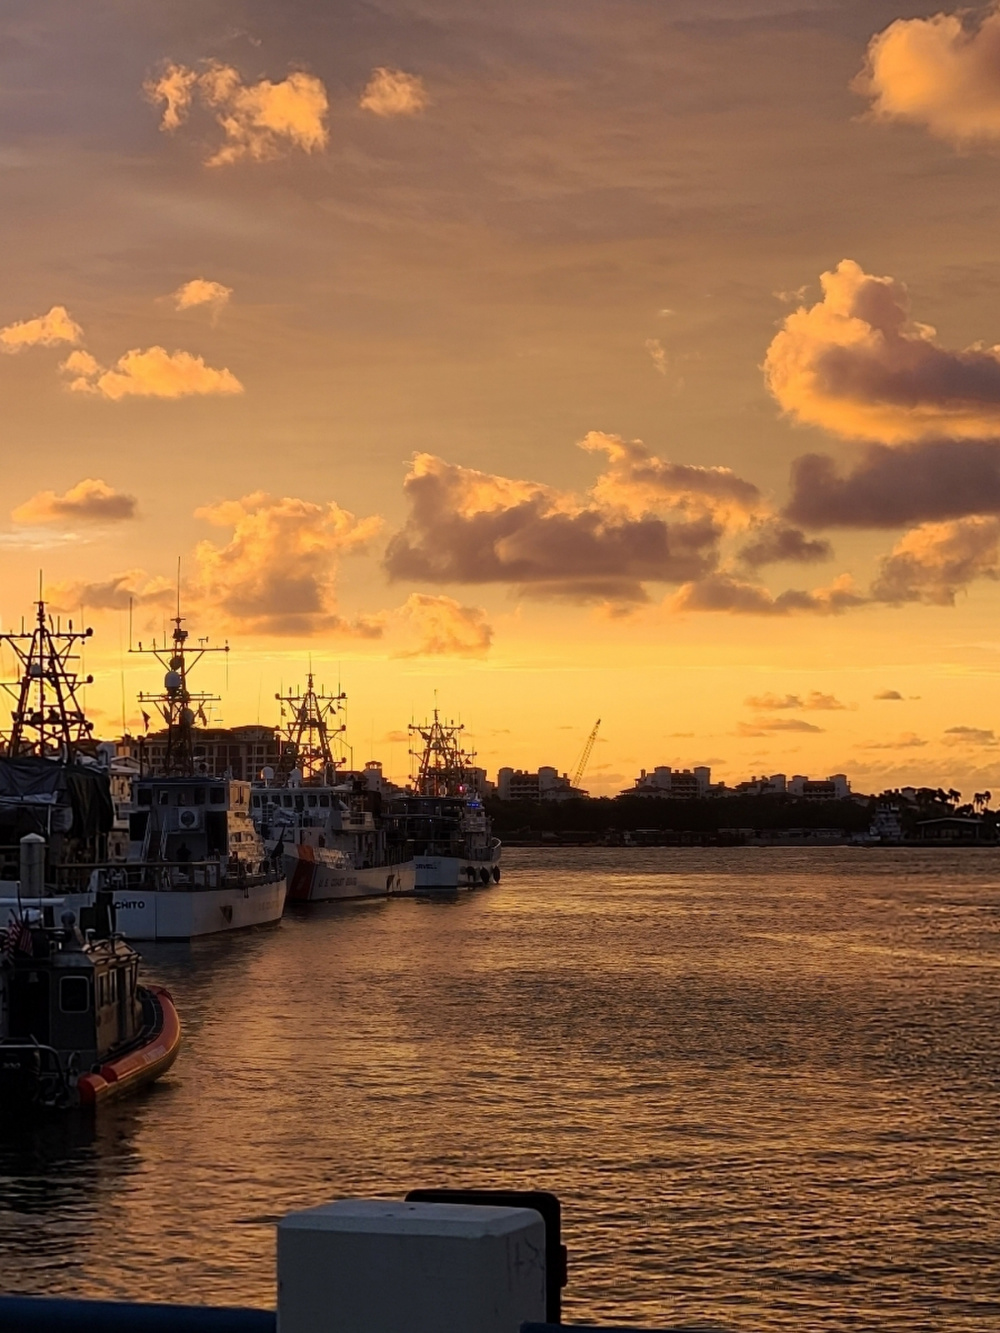 Coast Guard crews prepare for the day at sunrise at Base Miami Beach and Sector Miami as the cutters and small boats are moored Dec. 4, 2020. (U.S. Coast Guard photo by Chief Petty Officer Victor Cruz)